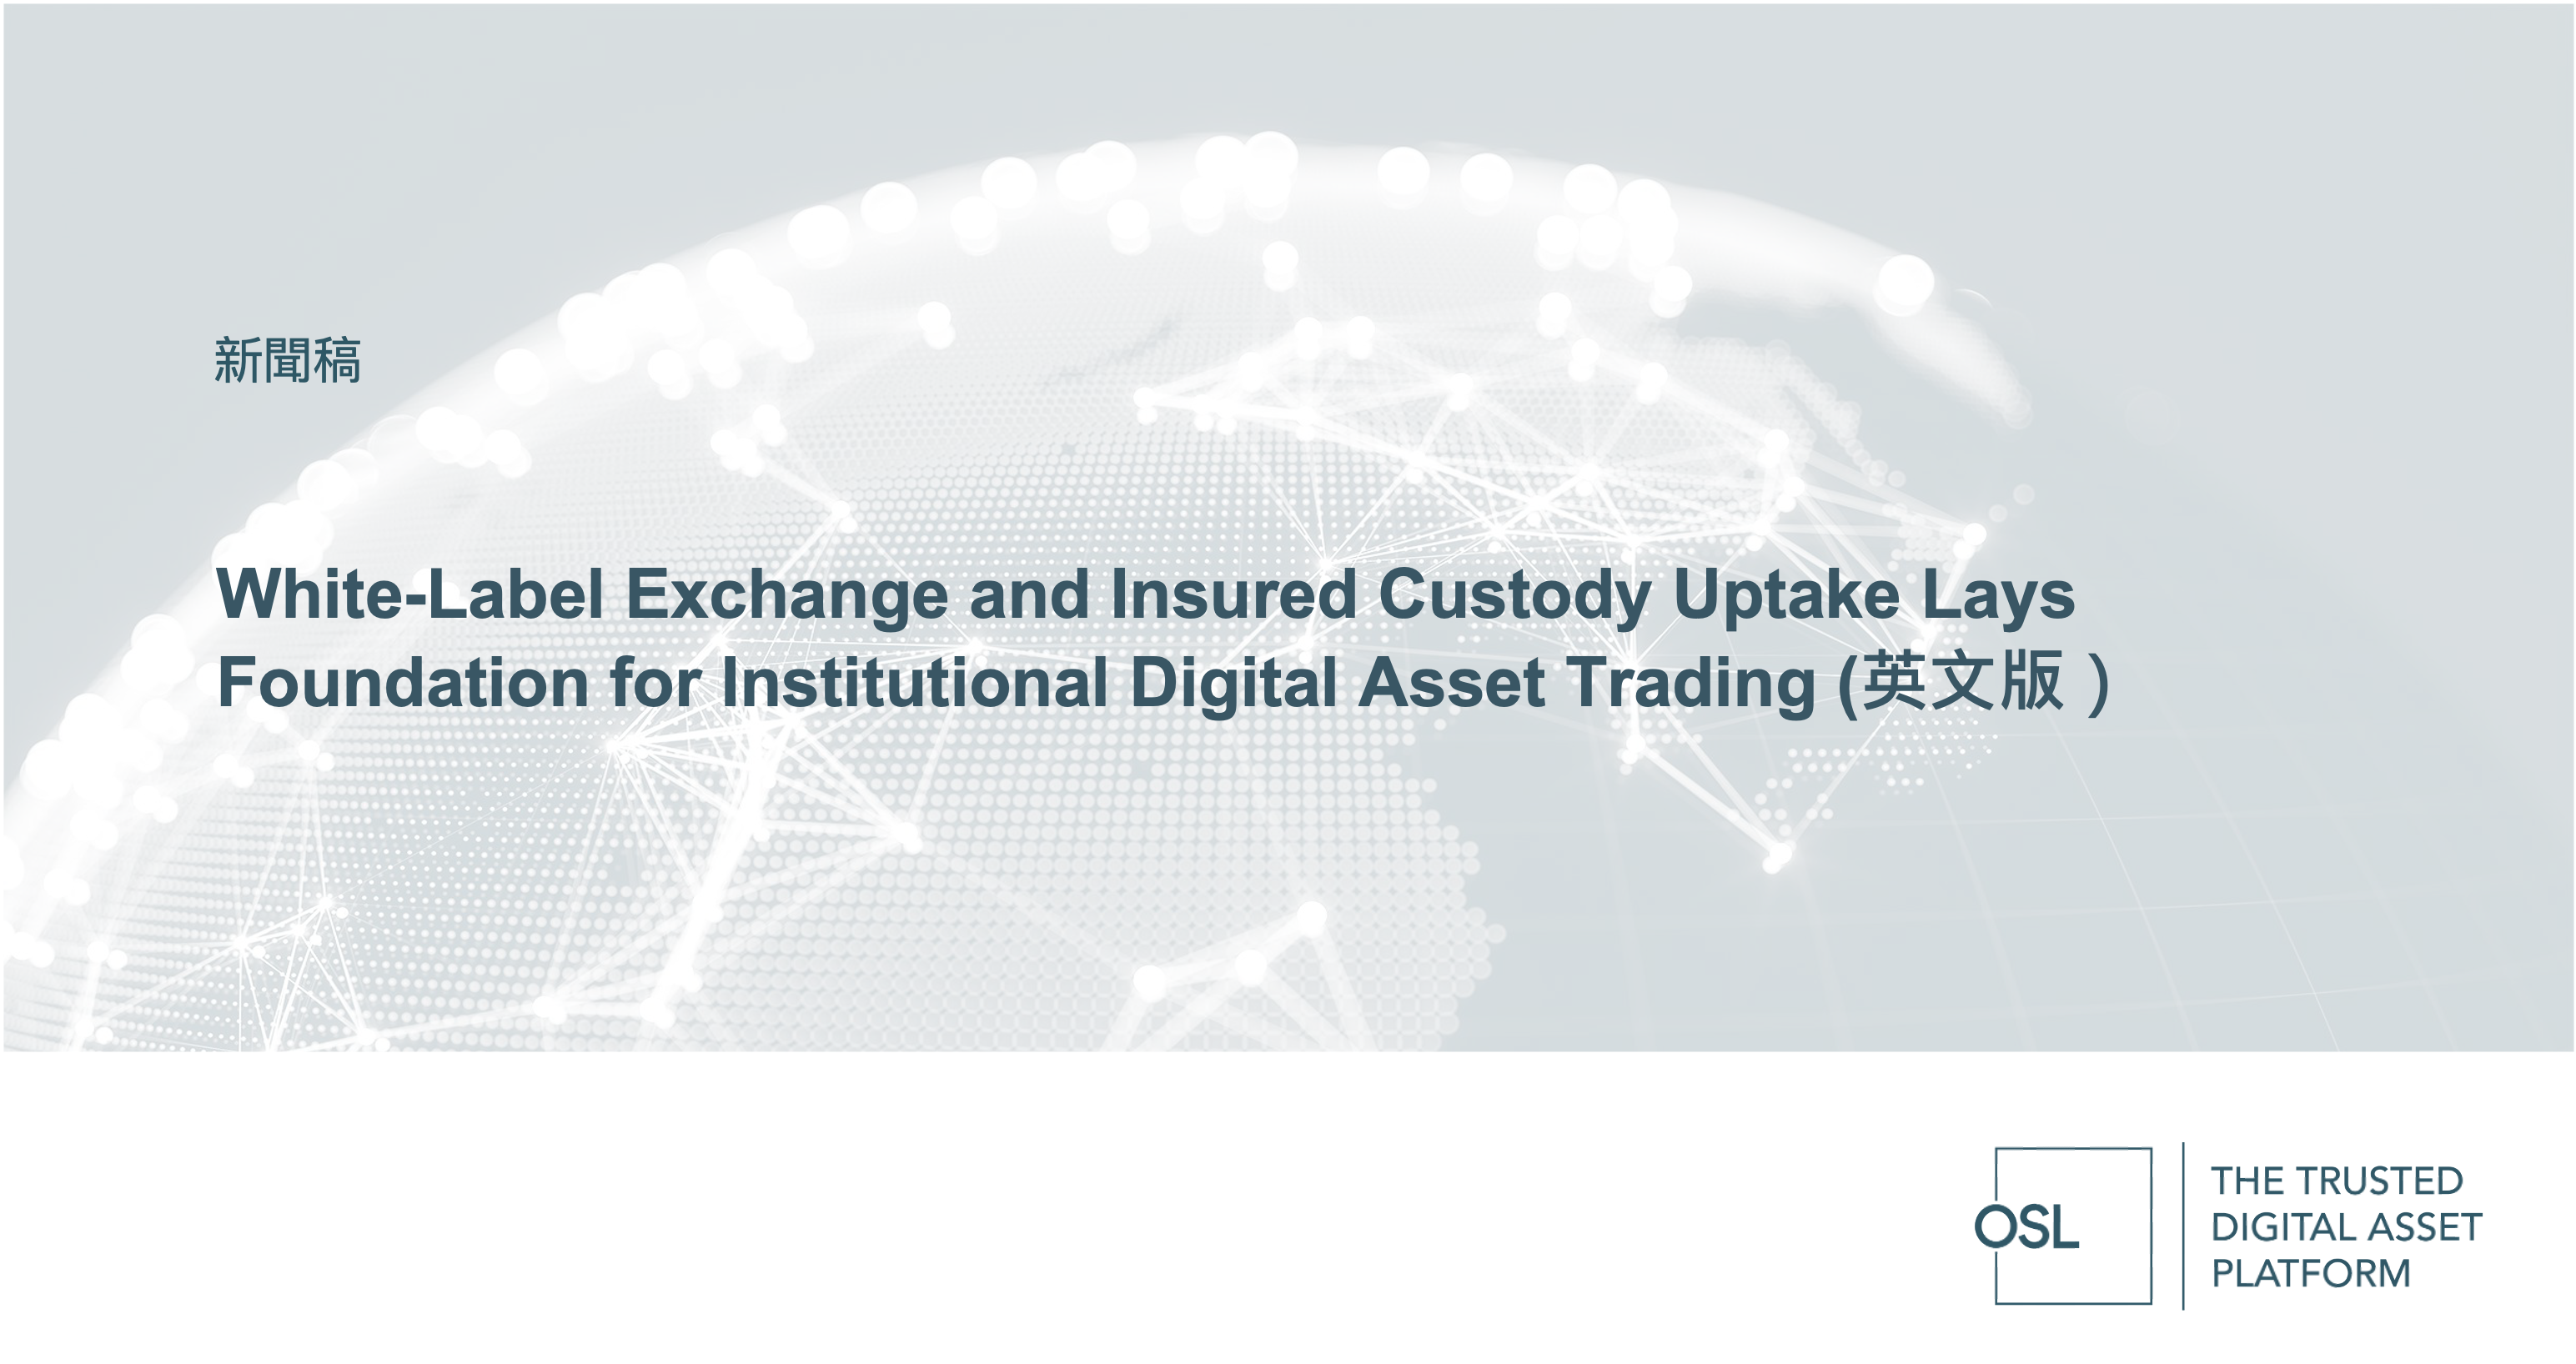 White-Label Exchange and Insured Custody Uptake Lays Foundation for Institutional Digital Asset Trading